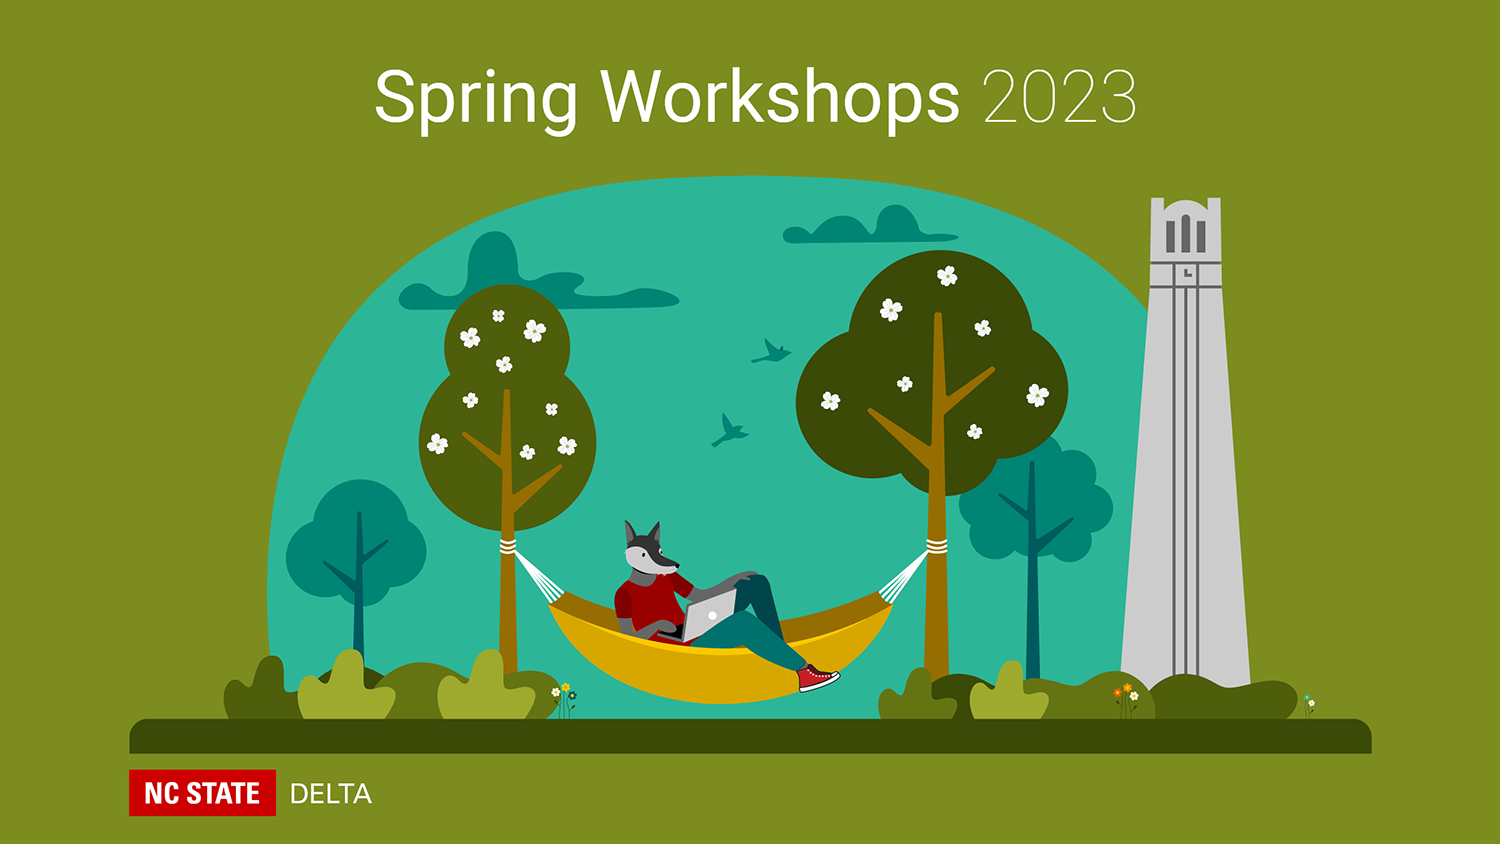 Decorative image of animated wolf in a hammock reading. "NC State DELTA Spring Workshops 2023."